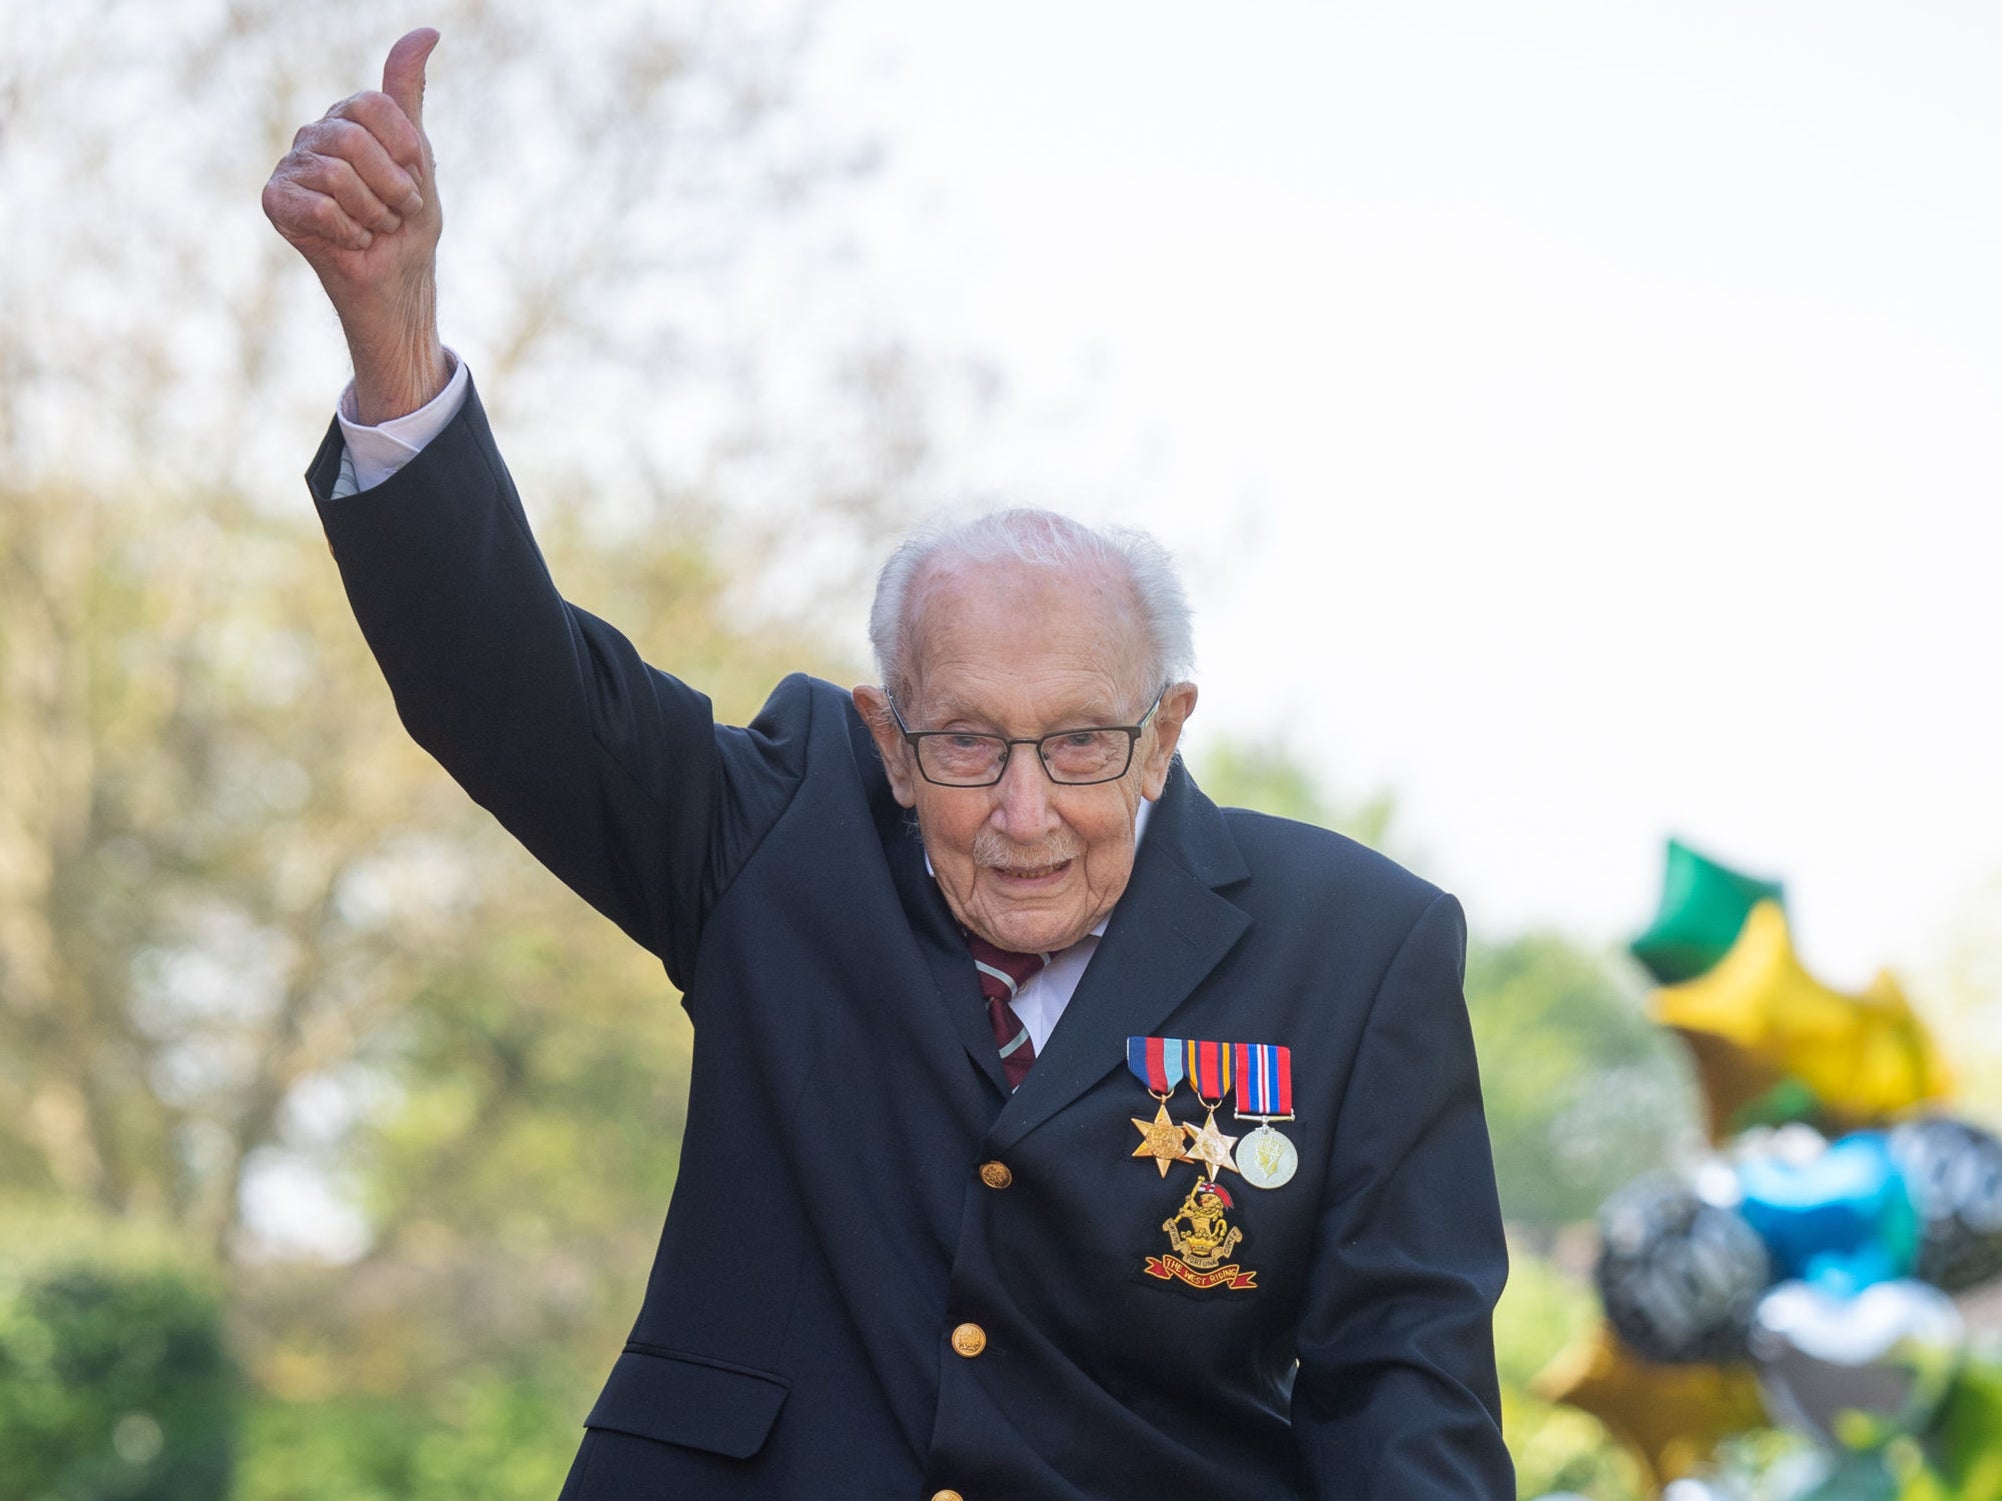 The Second World War veteran inspired hope during the first national Covid-19 lockdown in 2020, raising £38.9 million for the NHS